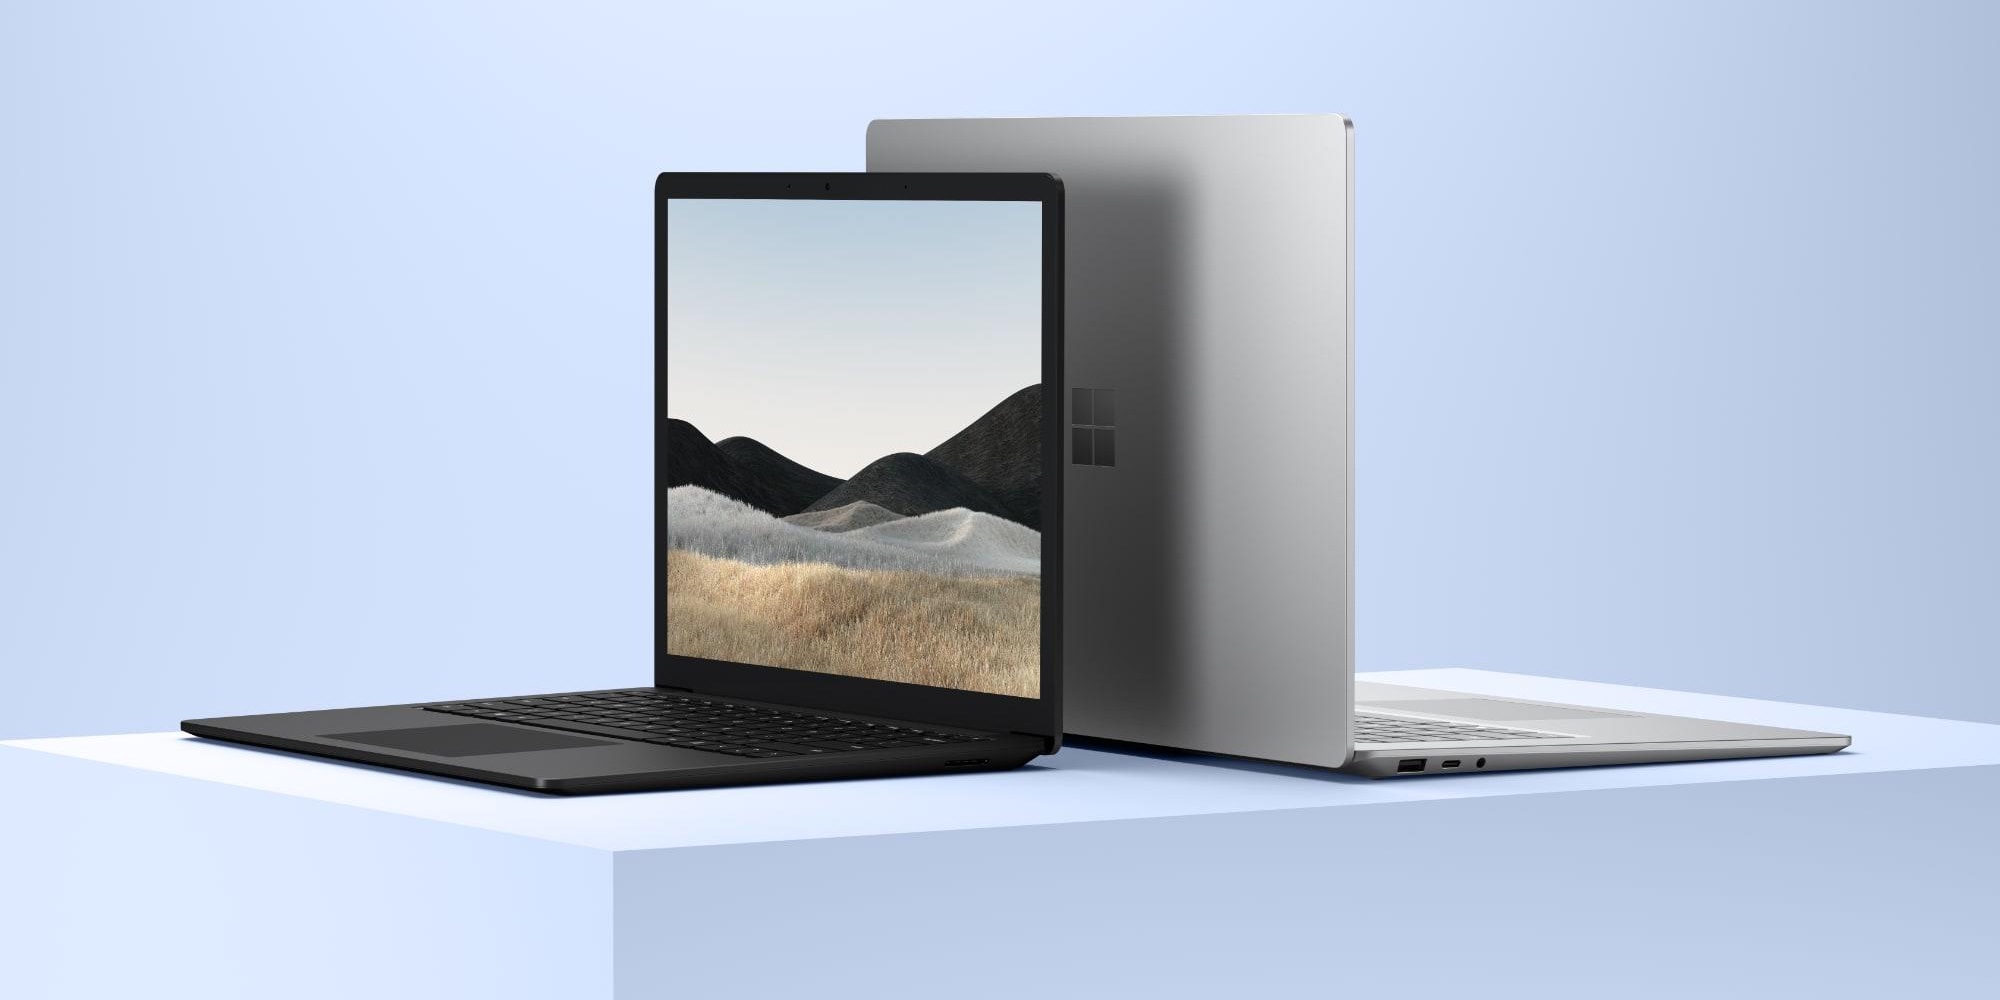 Surface Laptop 4 debuts alongside new Microsoft accessories - 9to5Toys